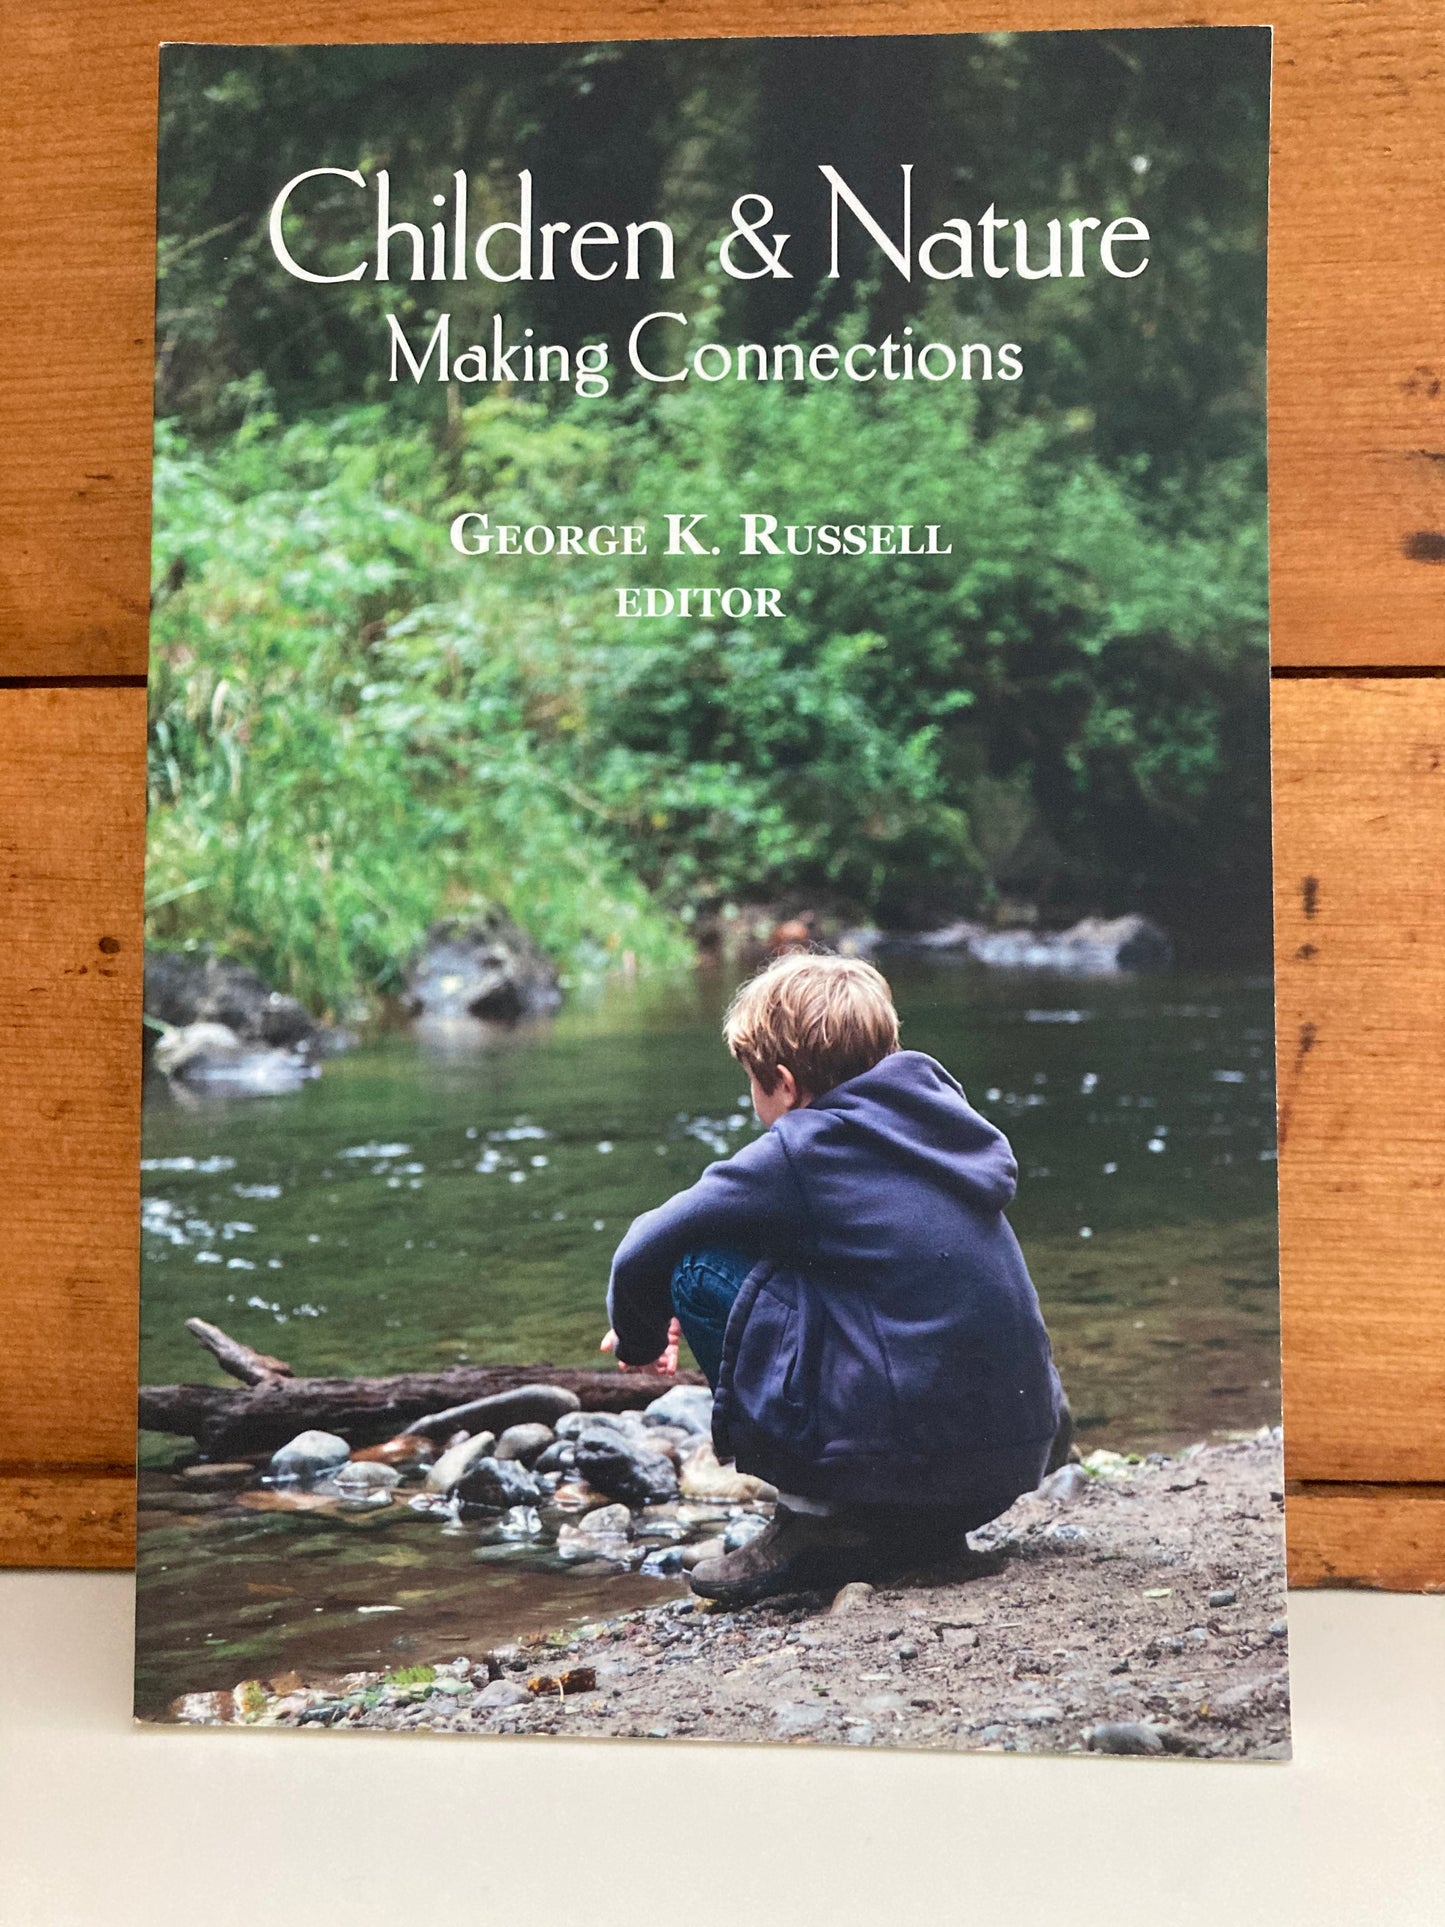 Parenting Resource Book - CHILDREN & NATURE, MAKING CONNECTIONS